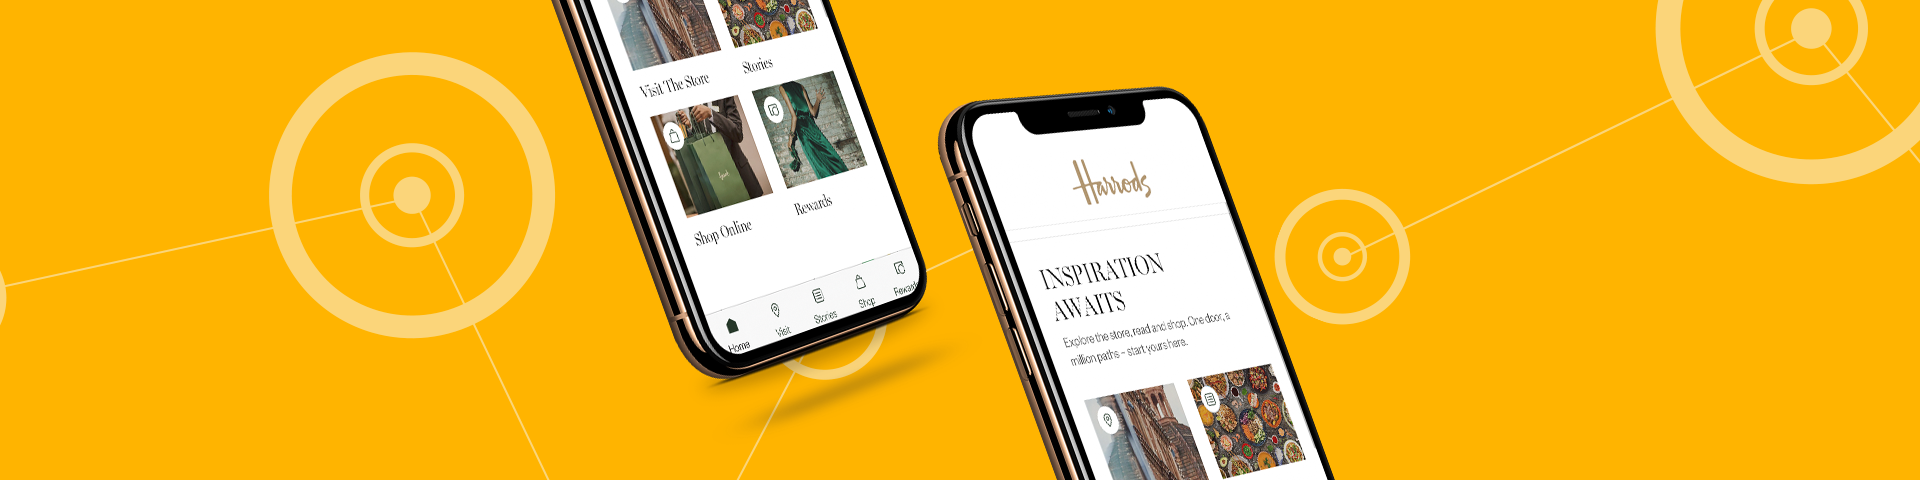 Harrods Case Study about Creating a Golden Record